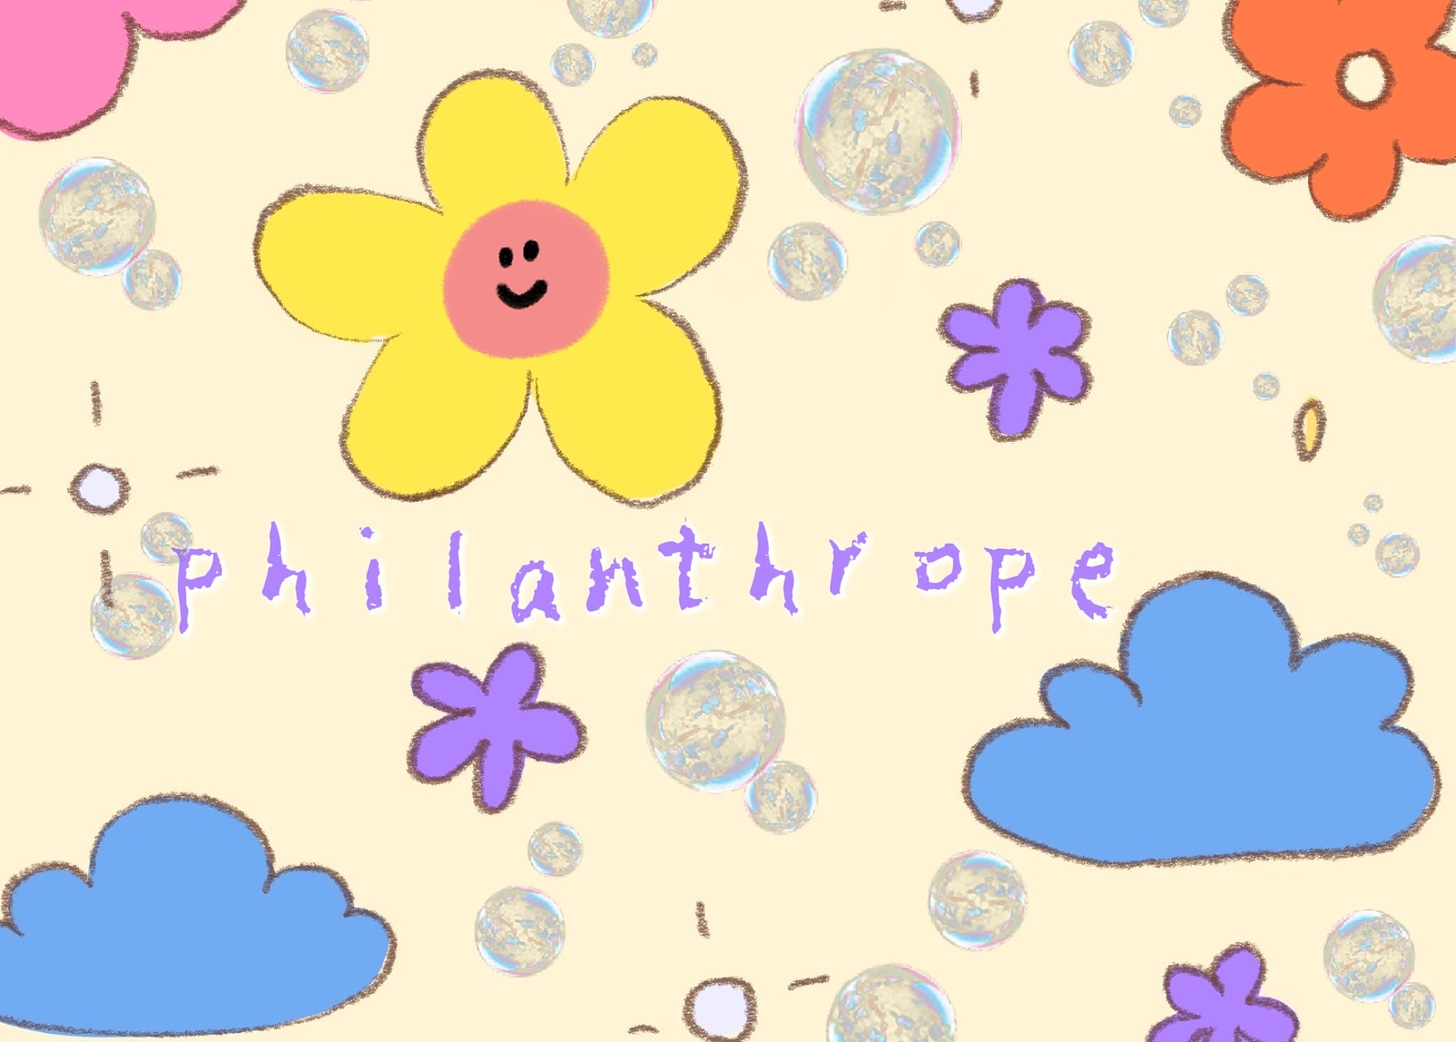 a graphic full of drawings of clouds and flowers as well as bubbles with the word “philanthrope” in a chalky purple font in the center.